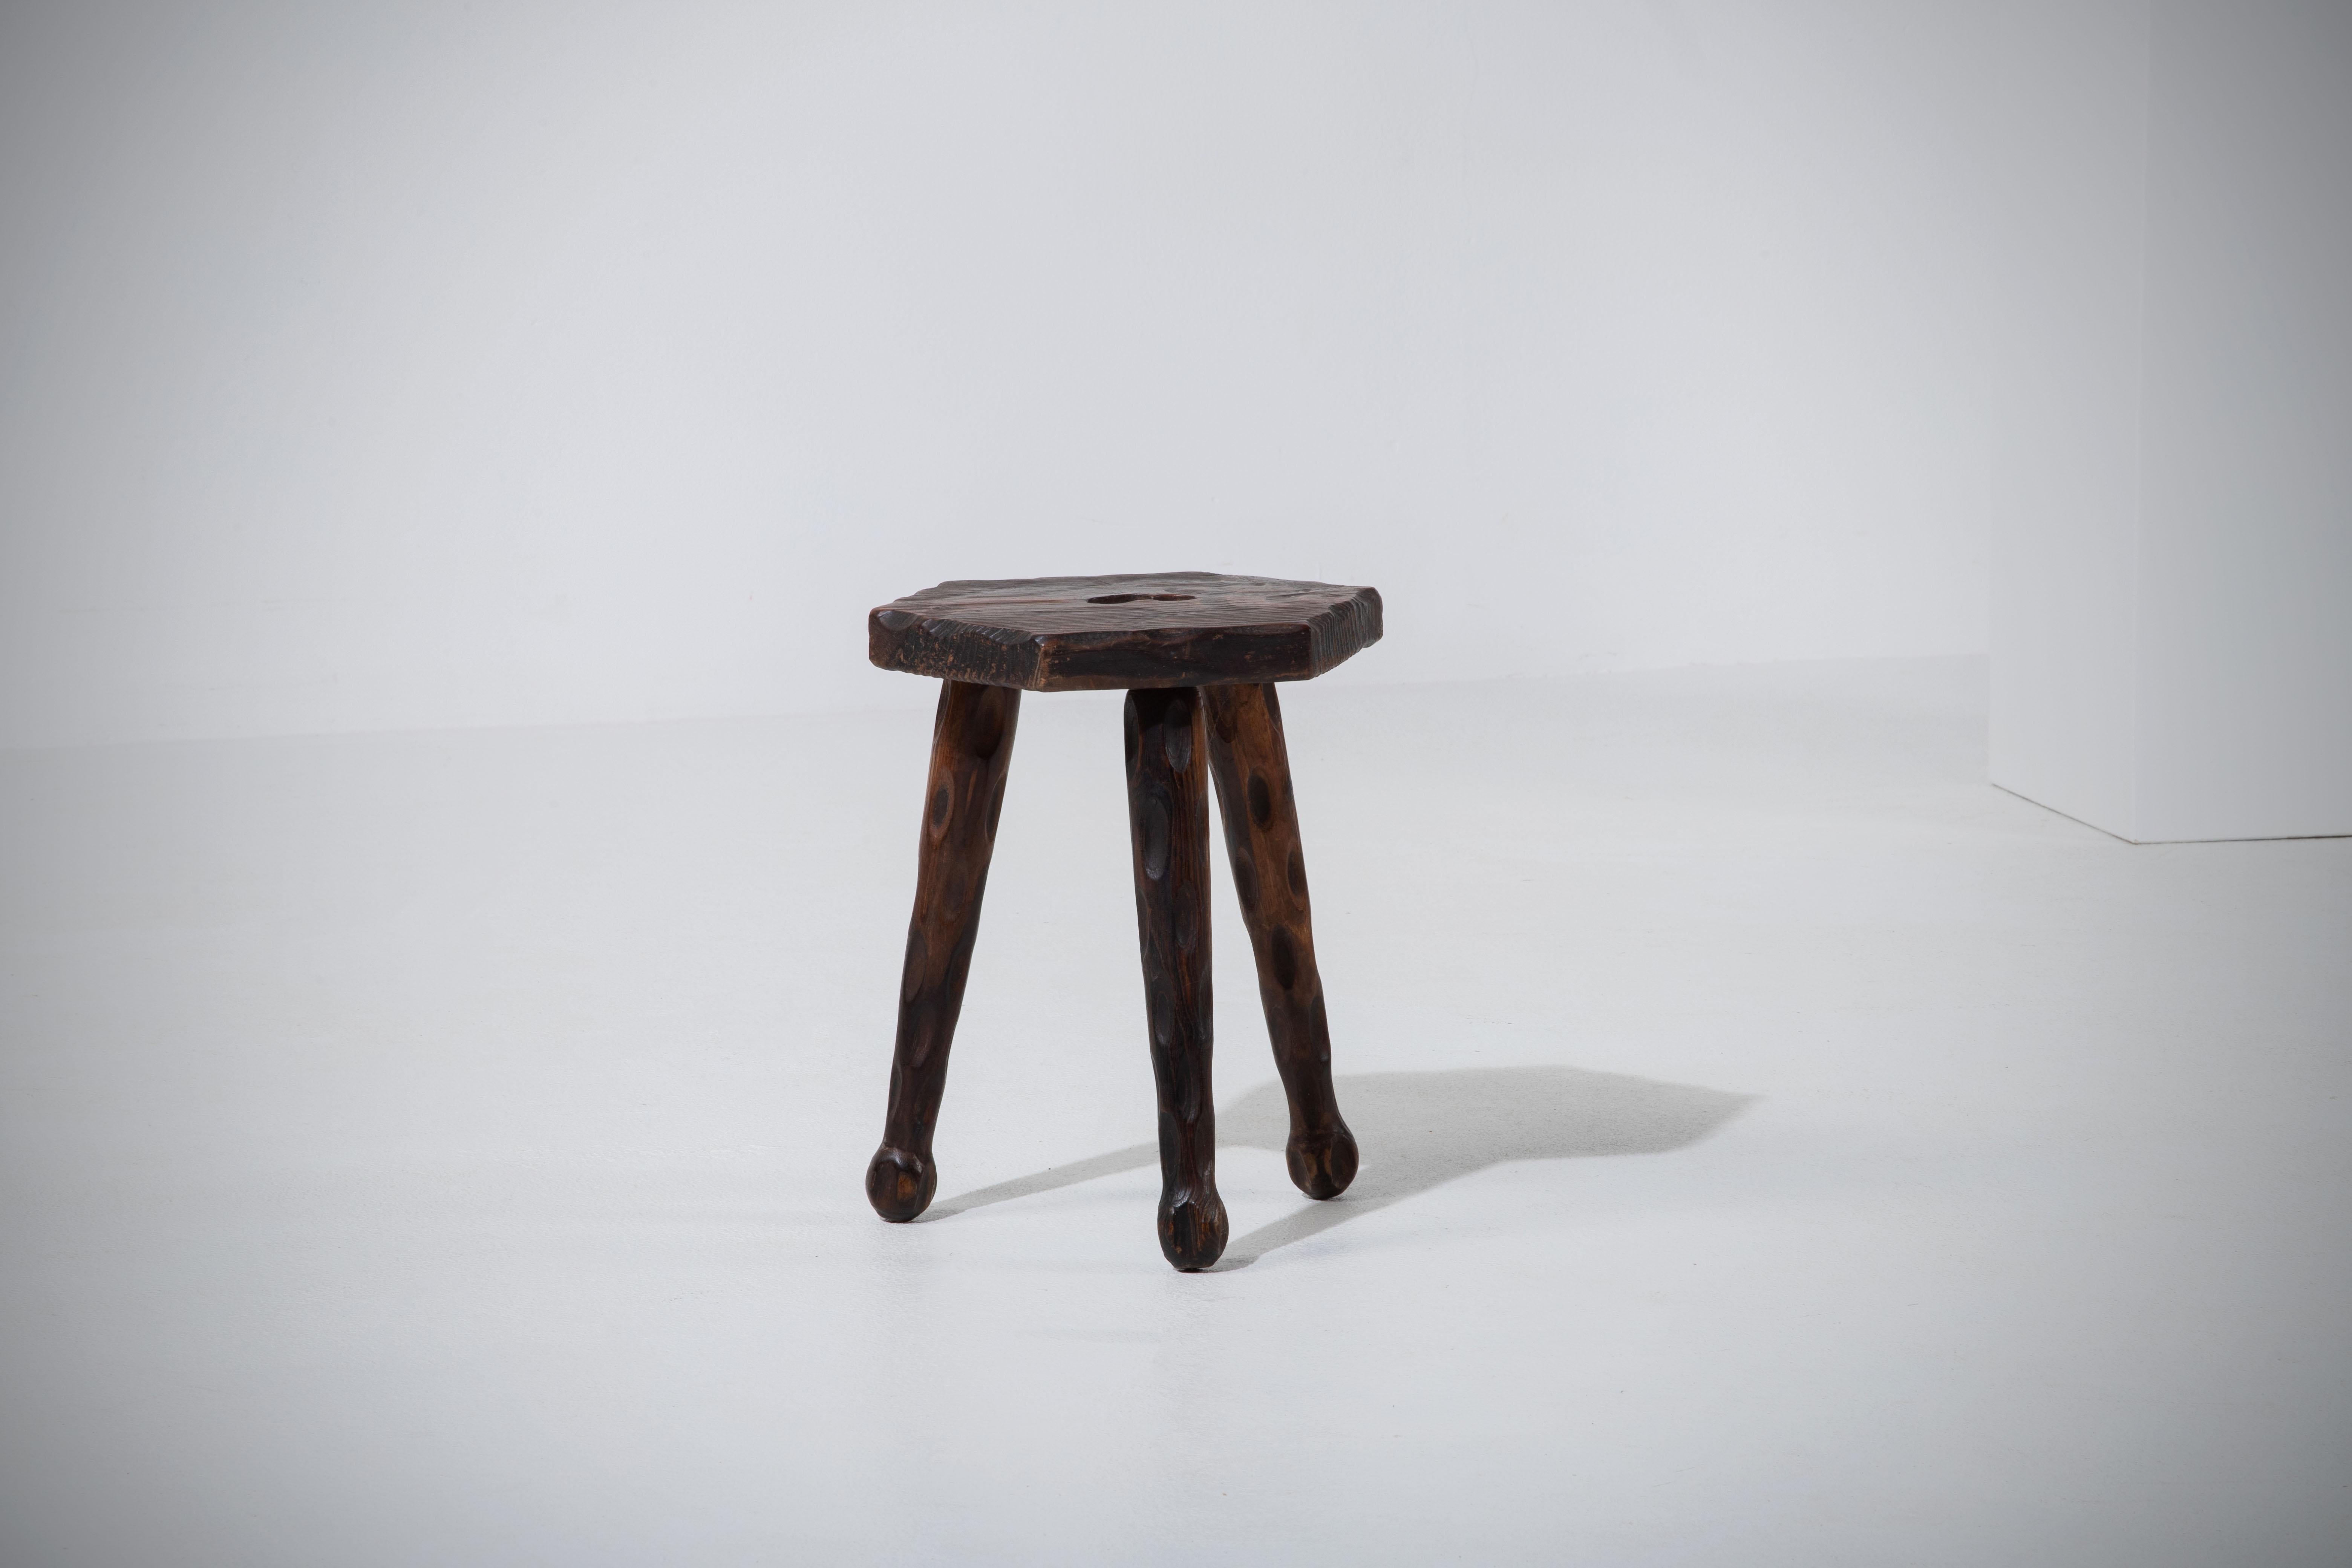 Introducing a fantastic midcentury wooden stool, crafted in France during the 1950s. This piece is constructed without hardware, boasting an elegant octagonal seat and gracefully tapered legs, all made from rich pine wood. The legs end with a unique